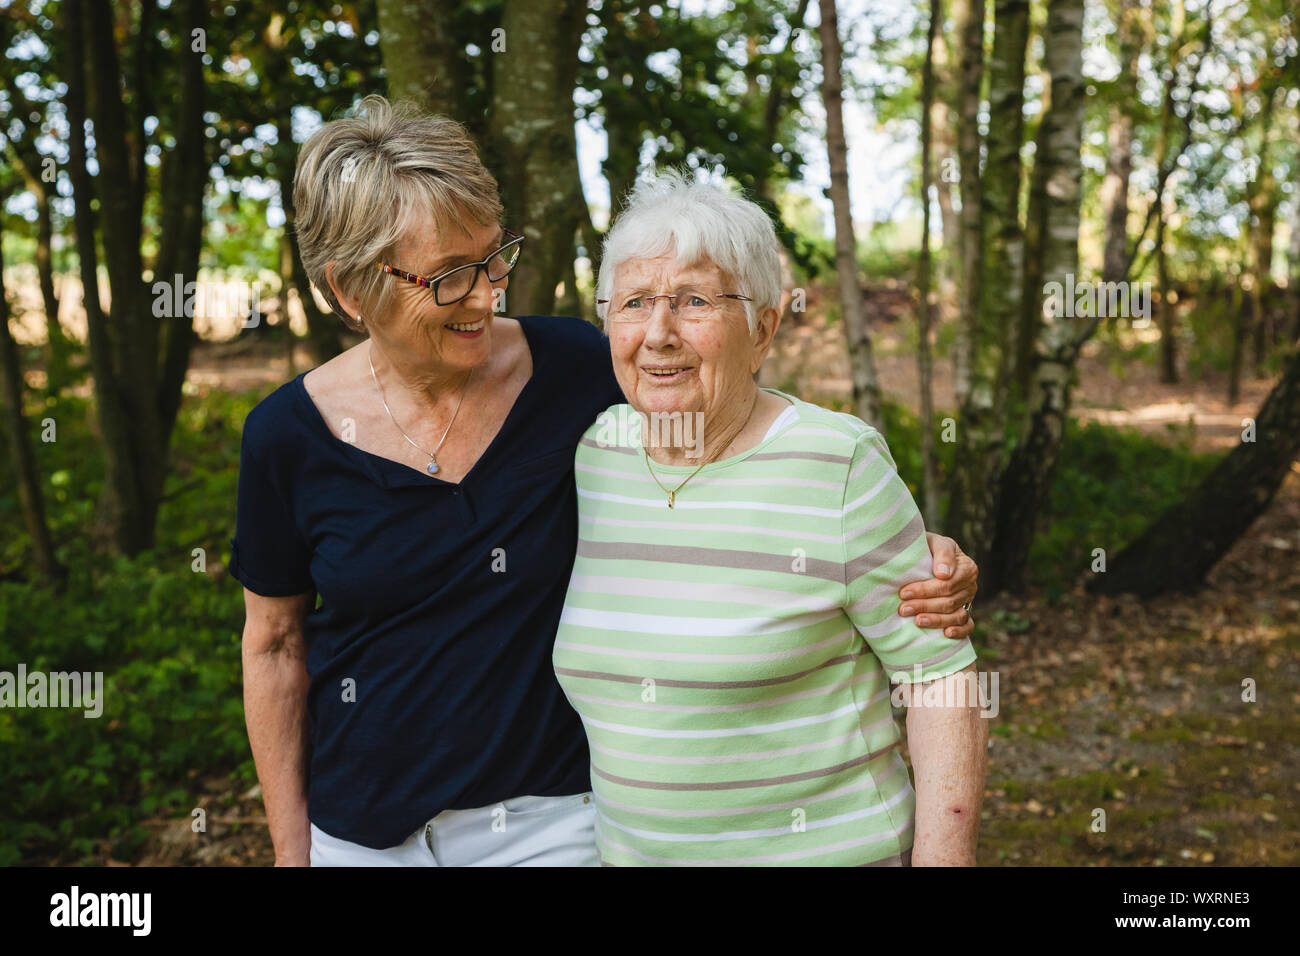 Very old joyful senior lady with her daughter walking embraced in a beautiful park, happy for being together Stock Photo